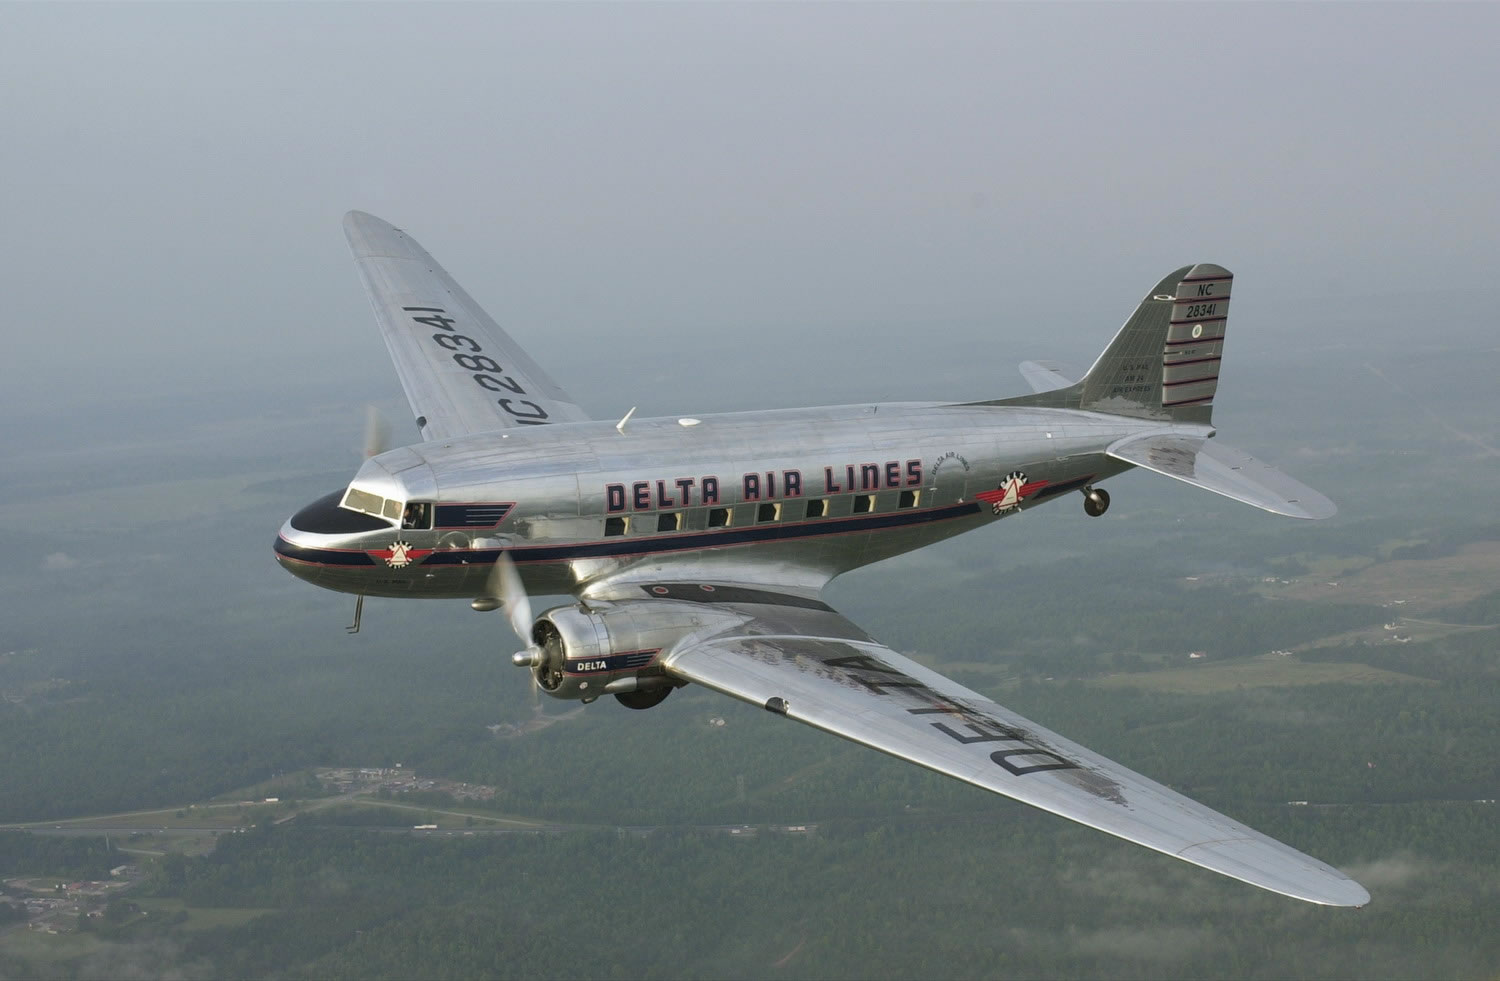 Douglas DC 3 Wallpaper And Background Imagex981